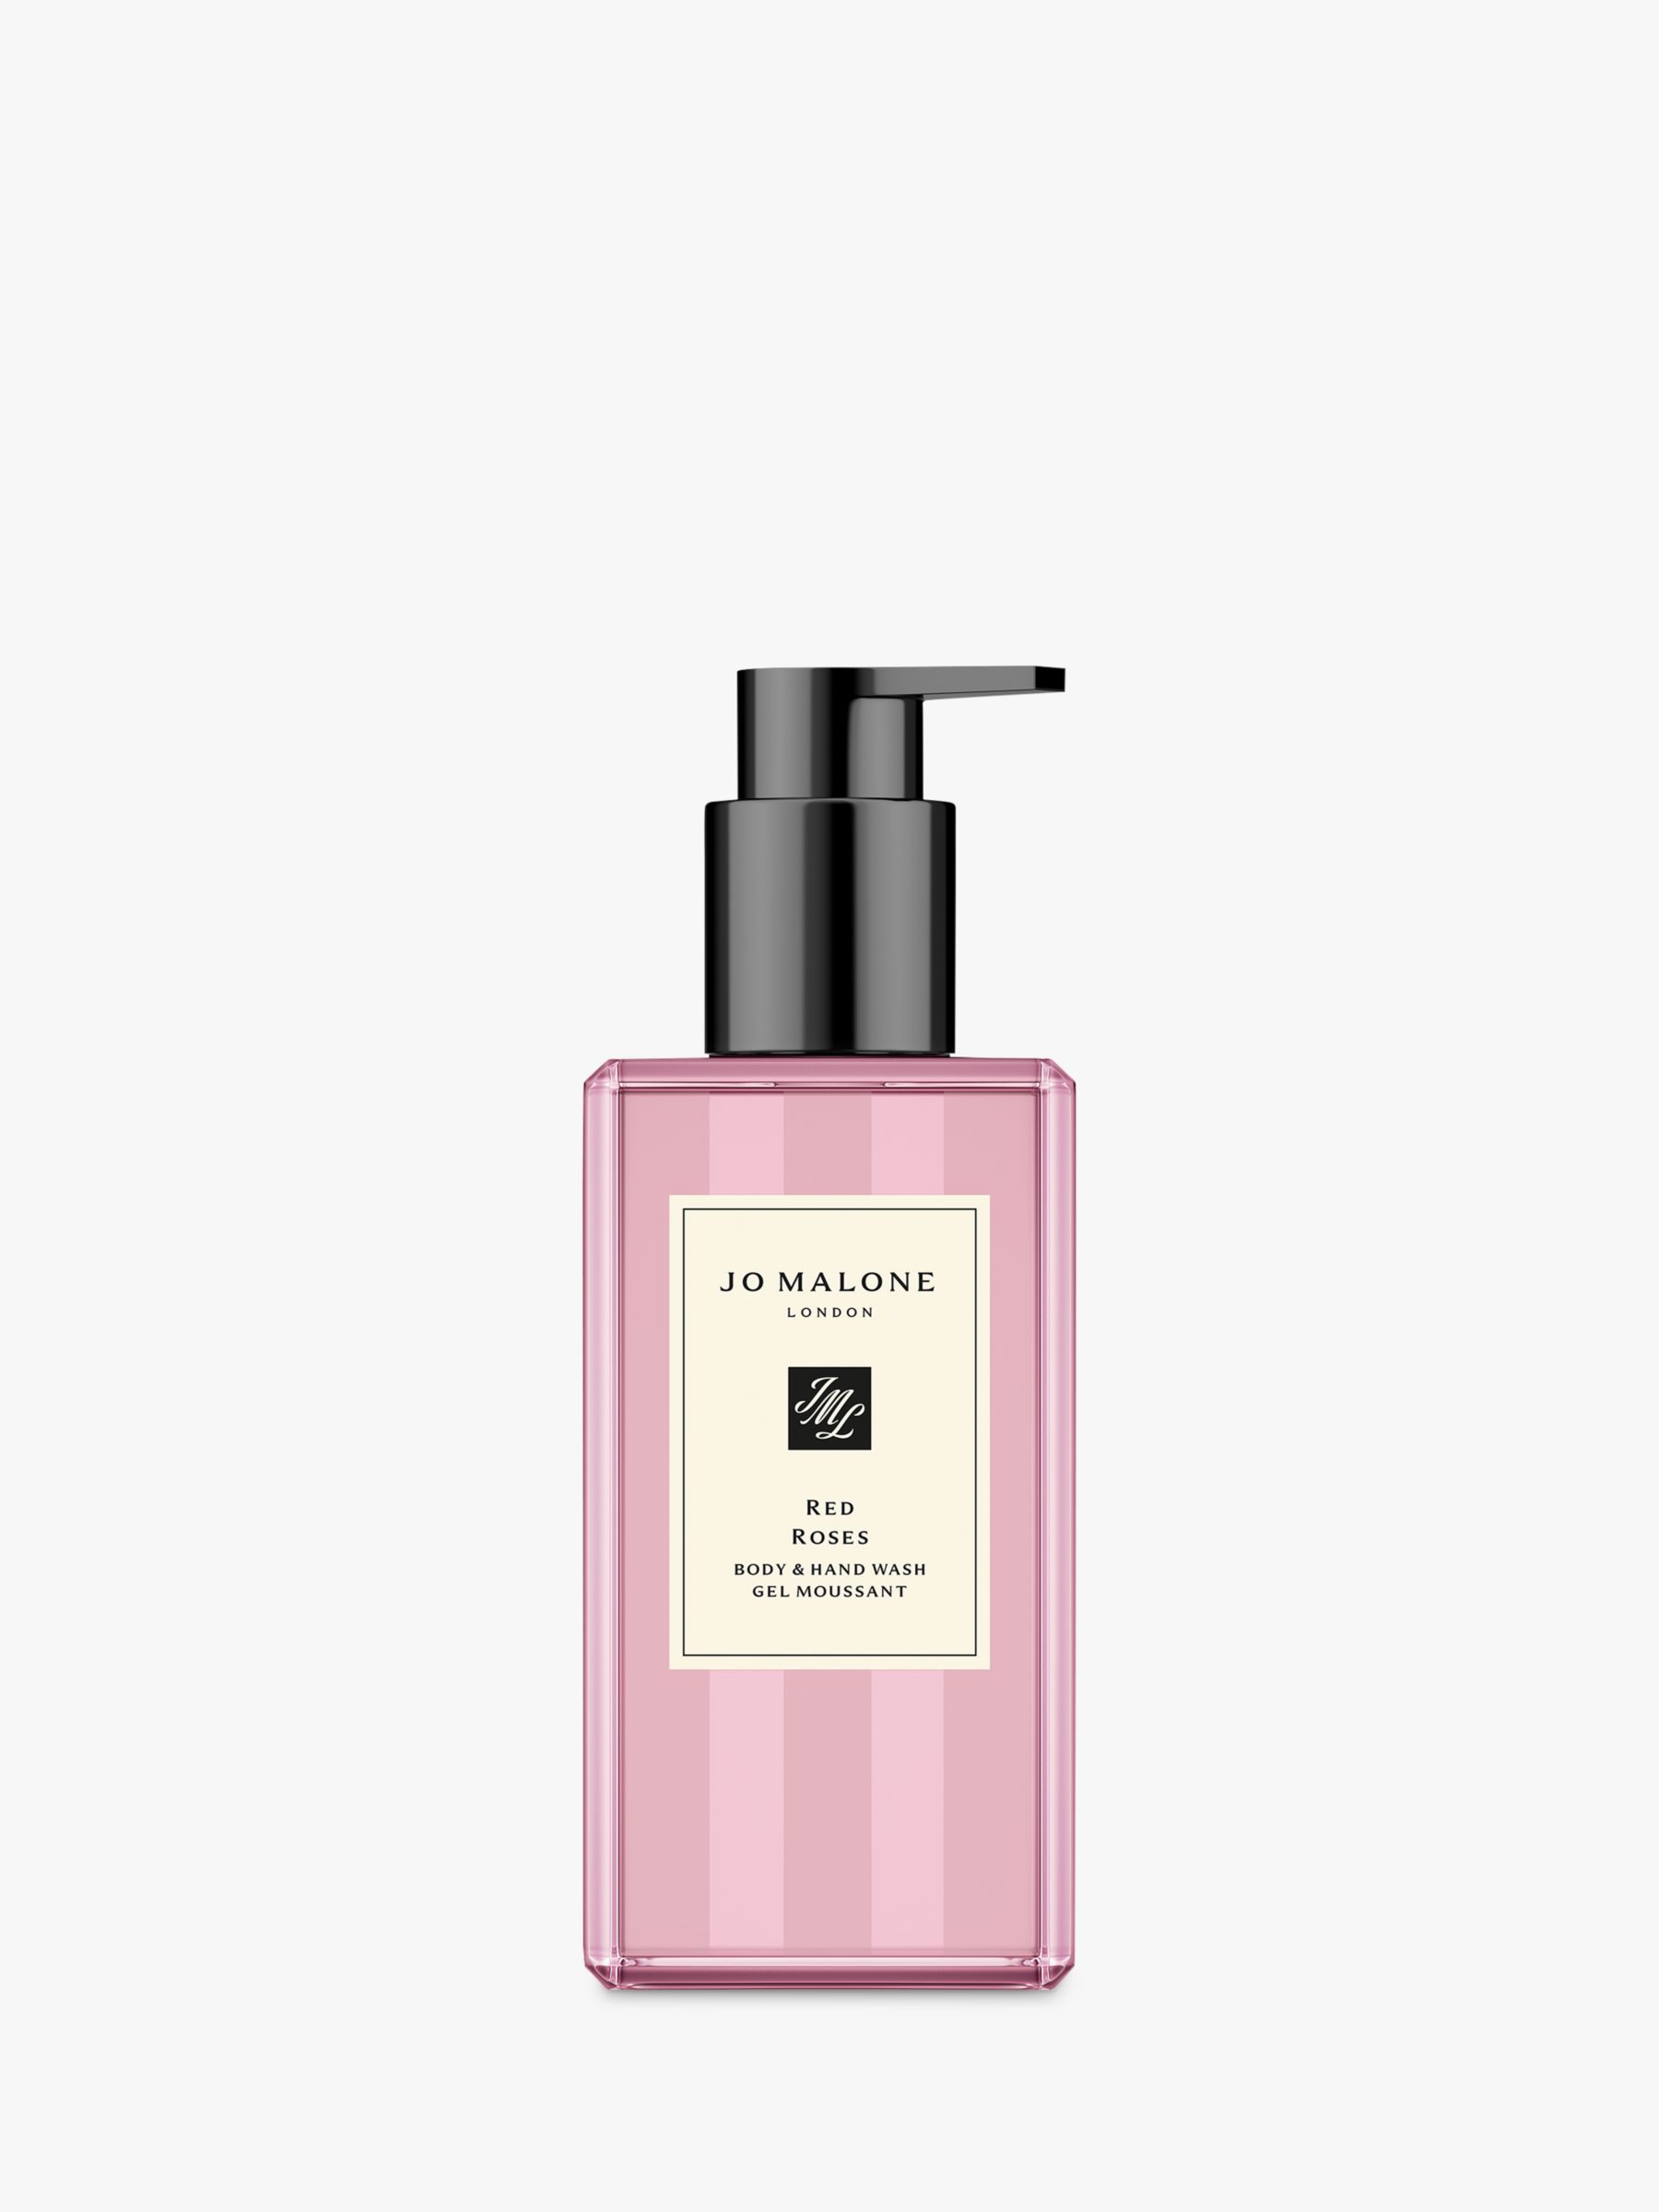 Jo Malone London Red Roses Body & Hand Wash, 250ml 1